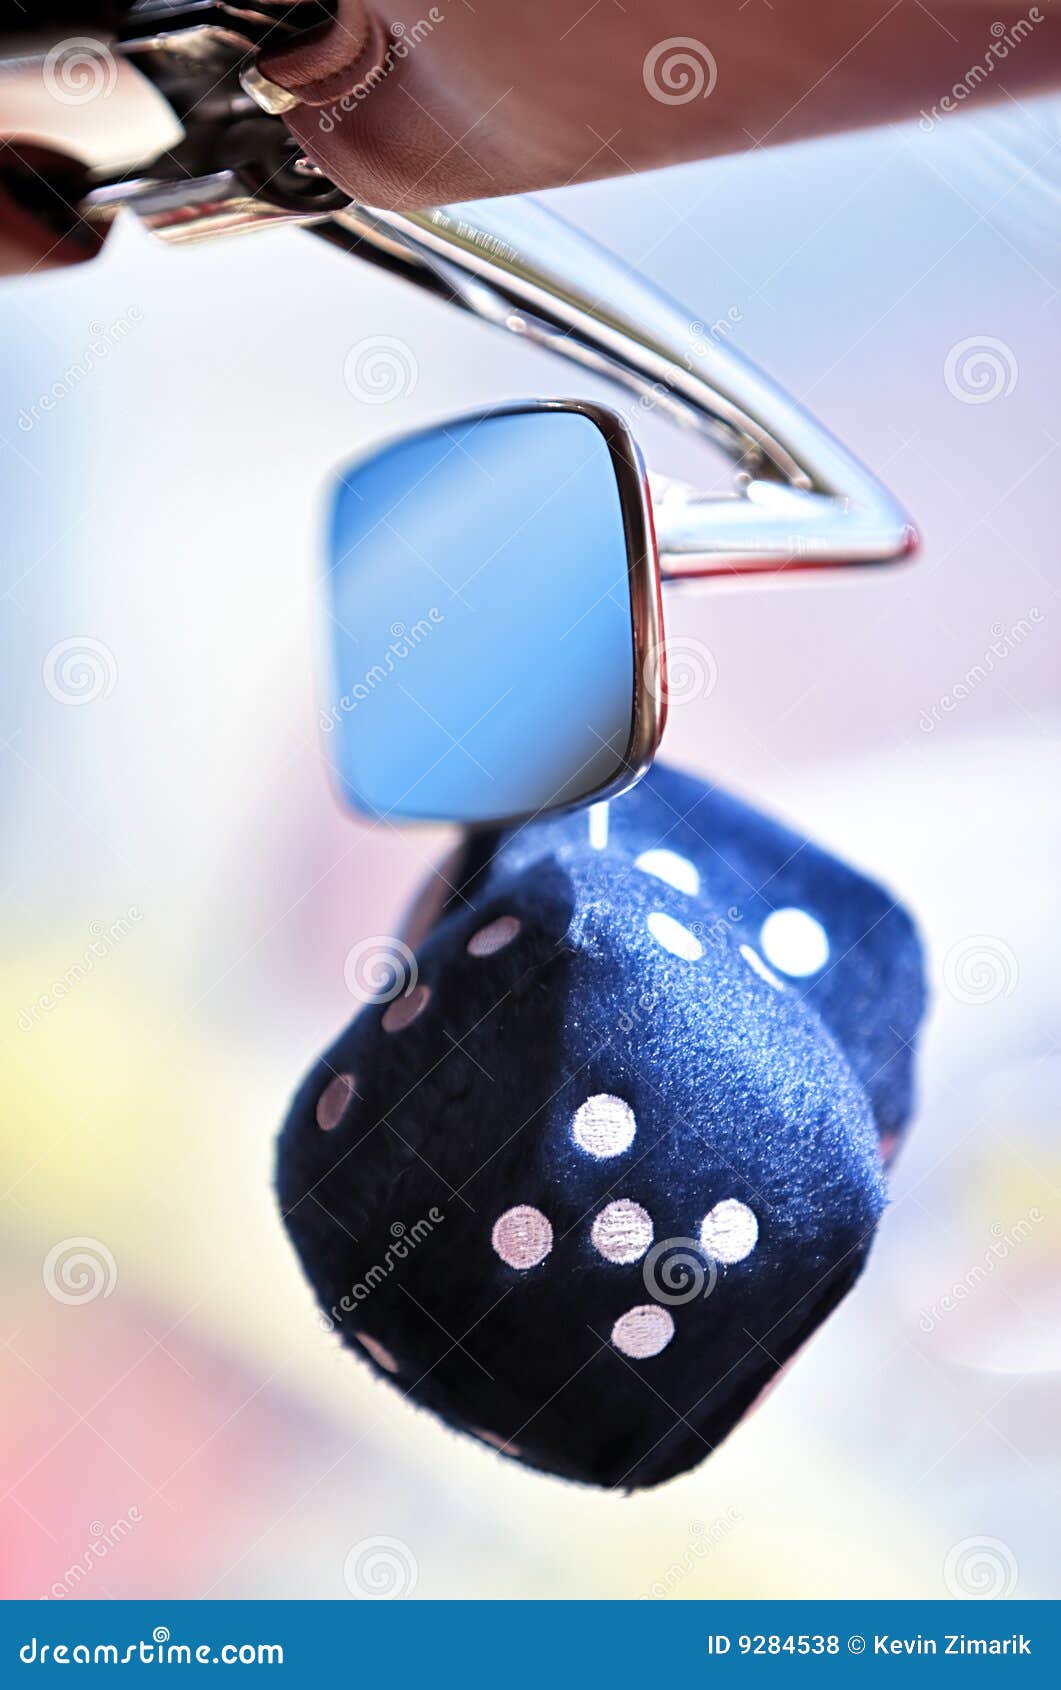 Fuzzy Dice On Rearview Mirror Stock-Foto - Getty Images